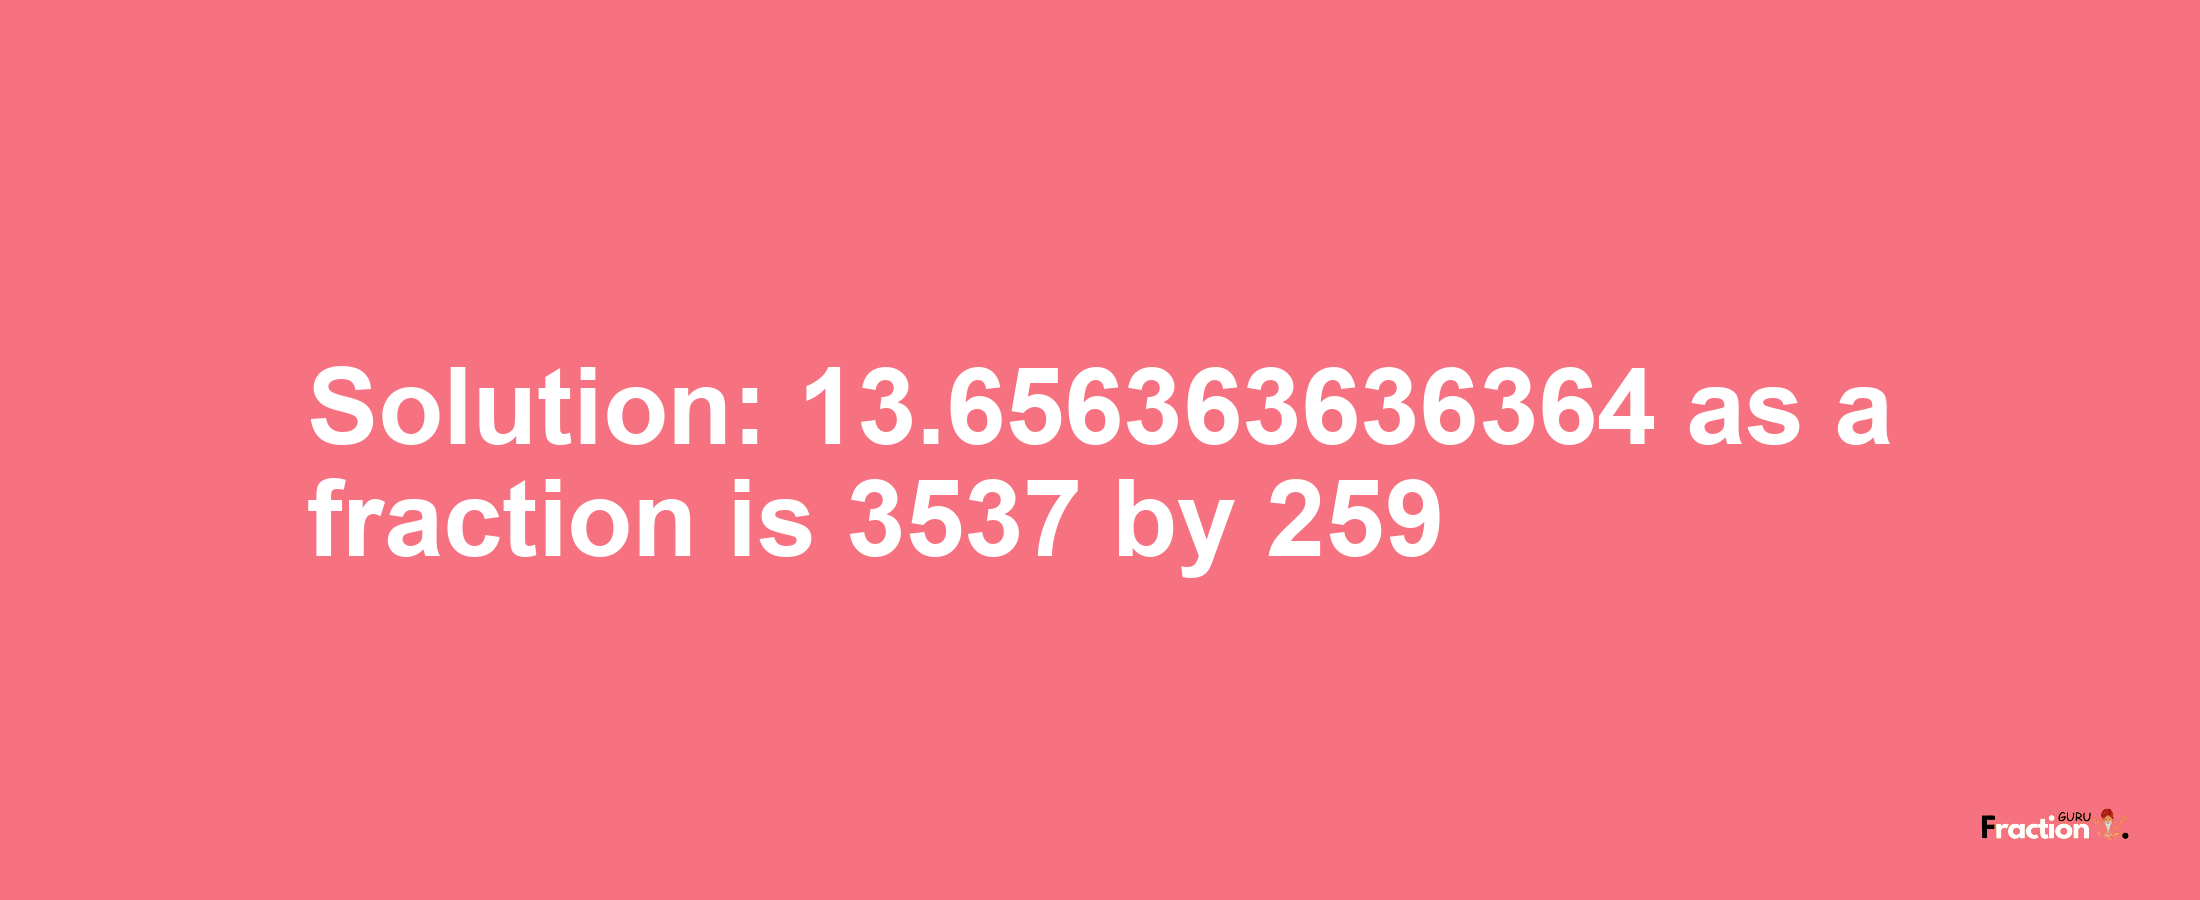 Solution:13.656363636364 as a fraction is 3537/259